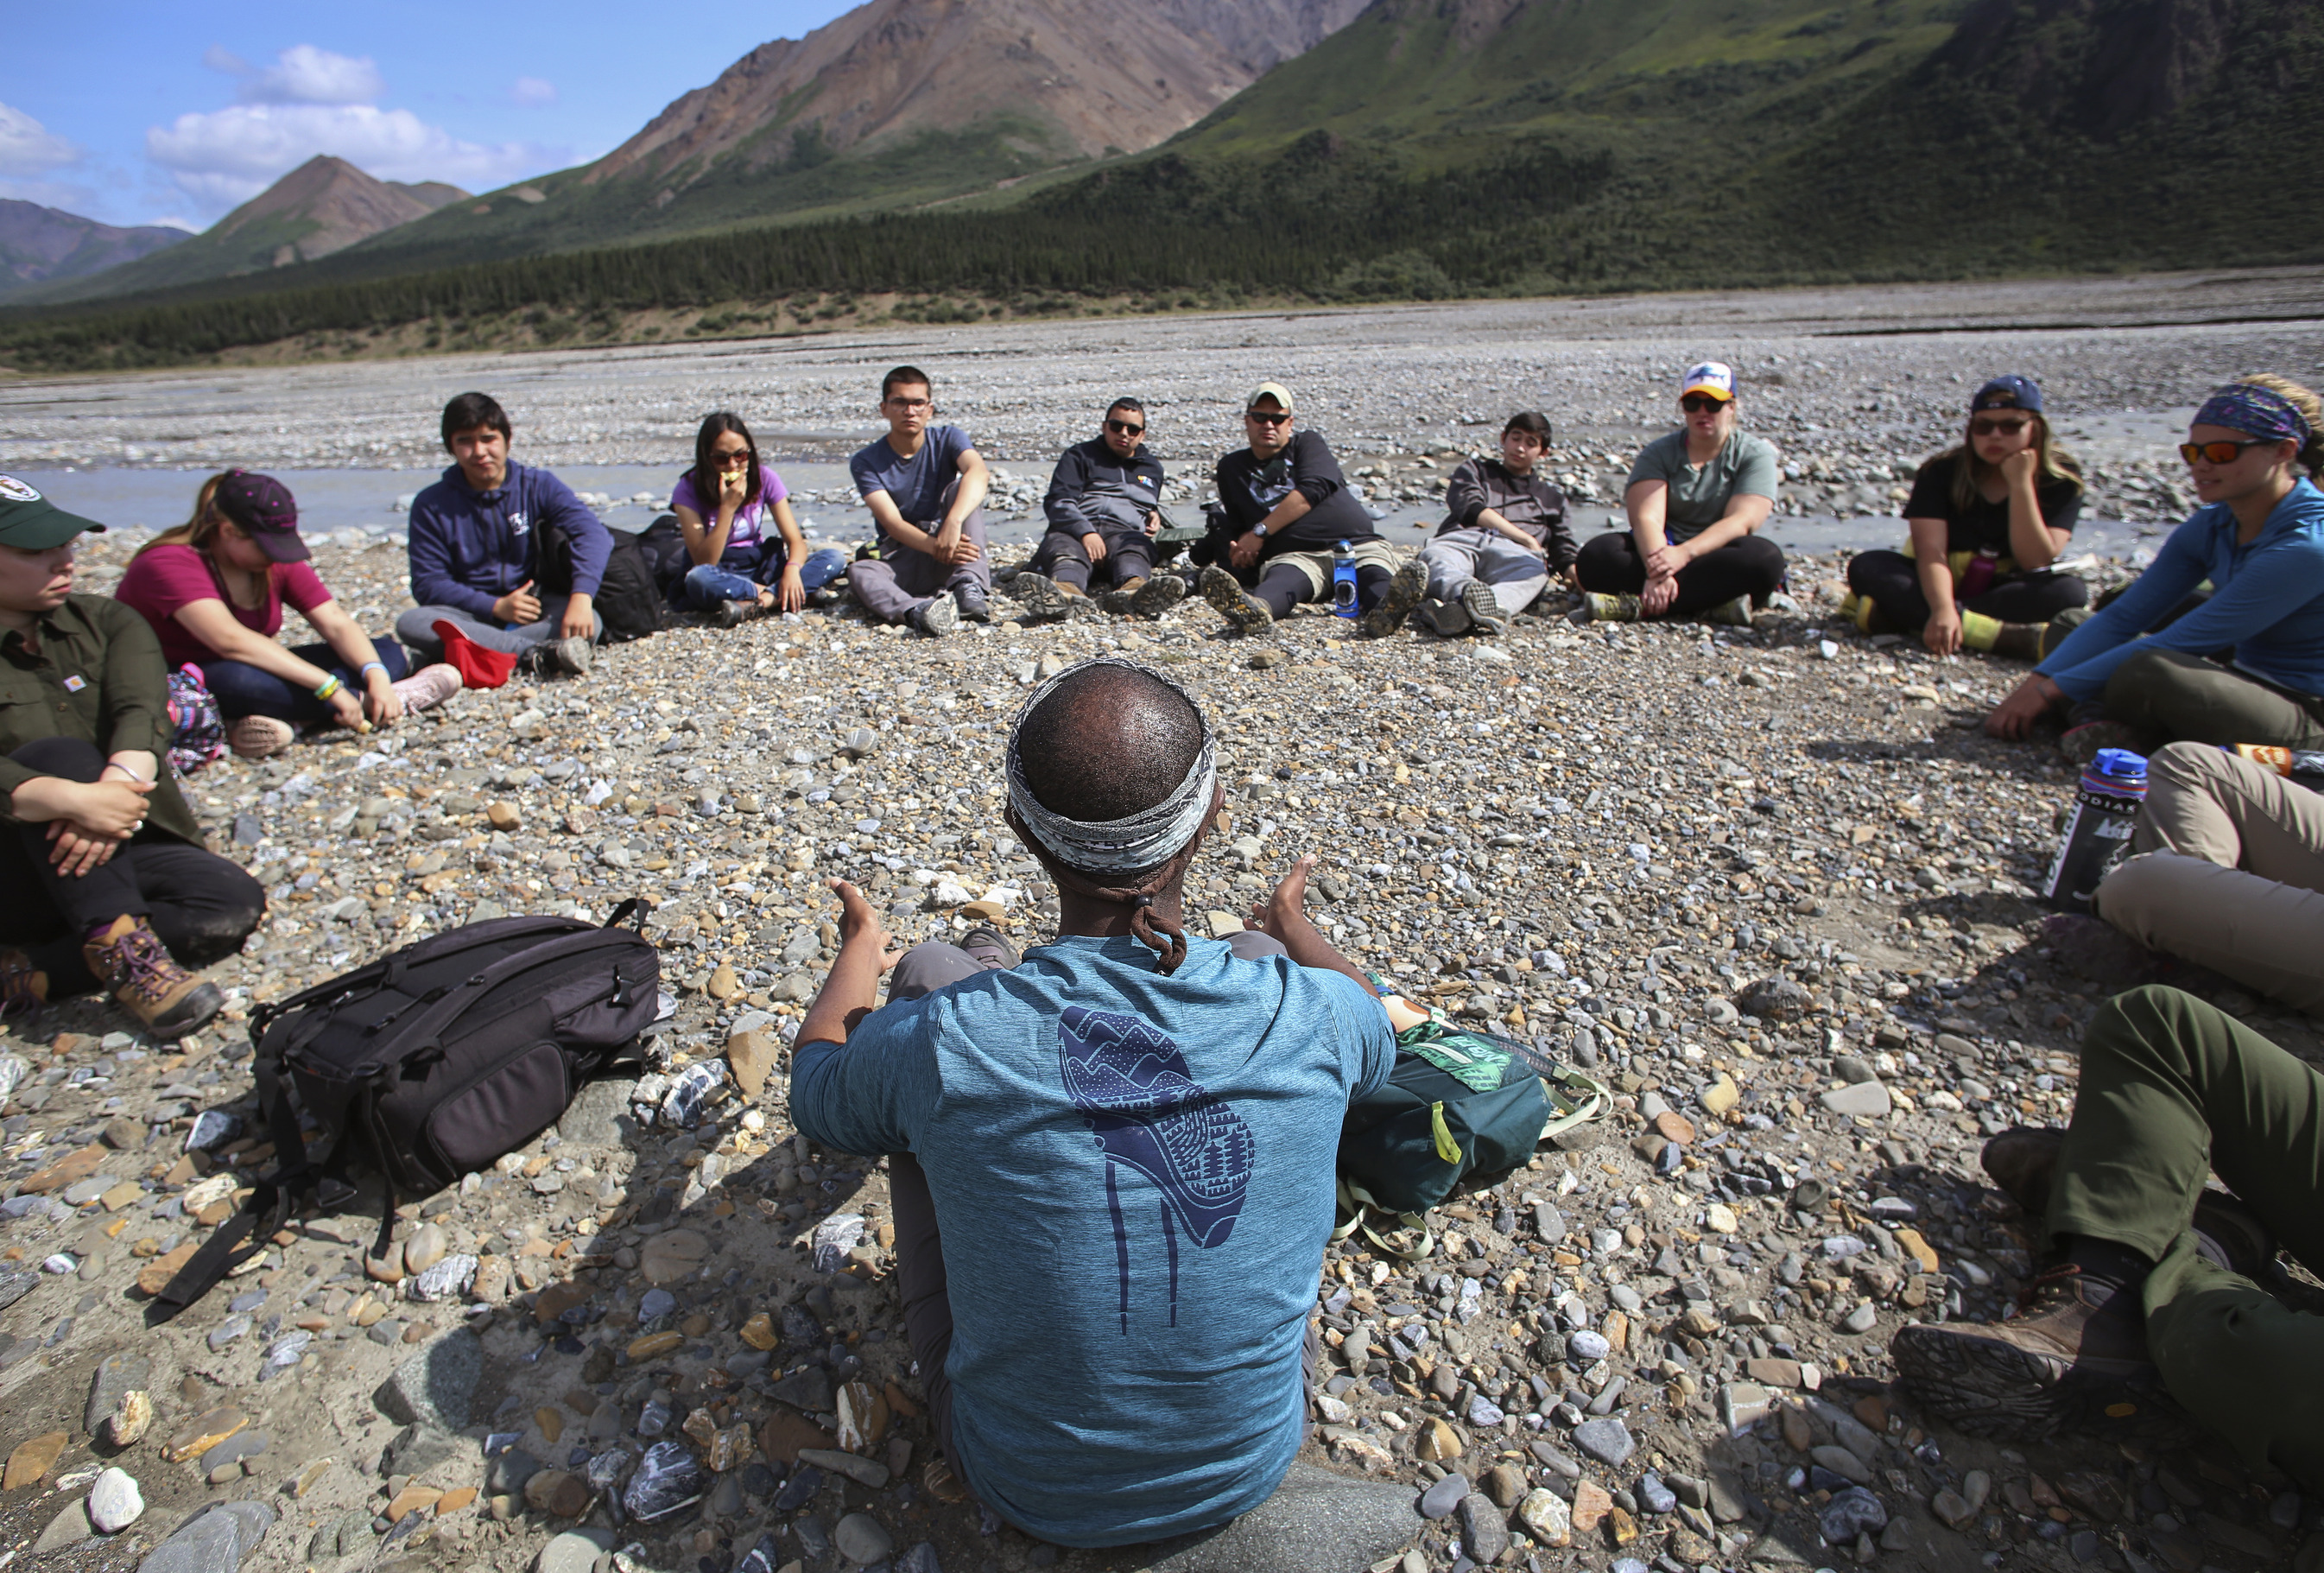 teenagers sitting in a circle on the ground near a river, listening to a man speak